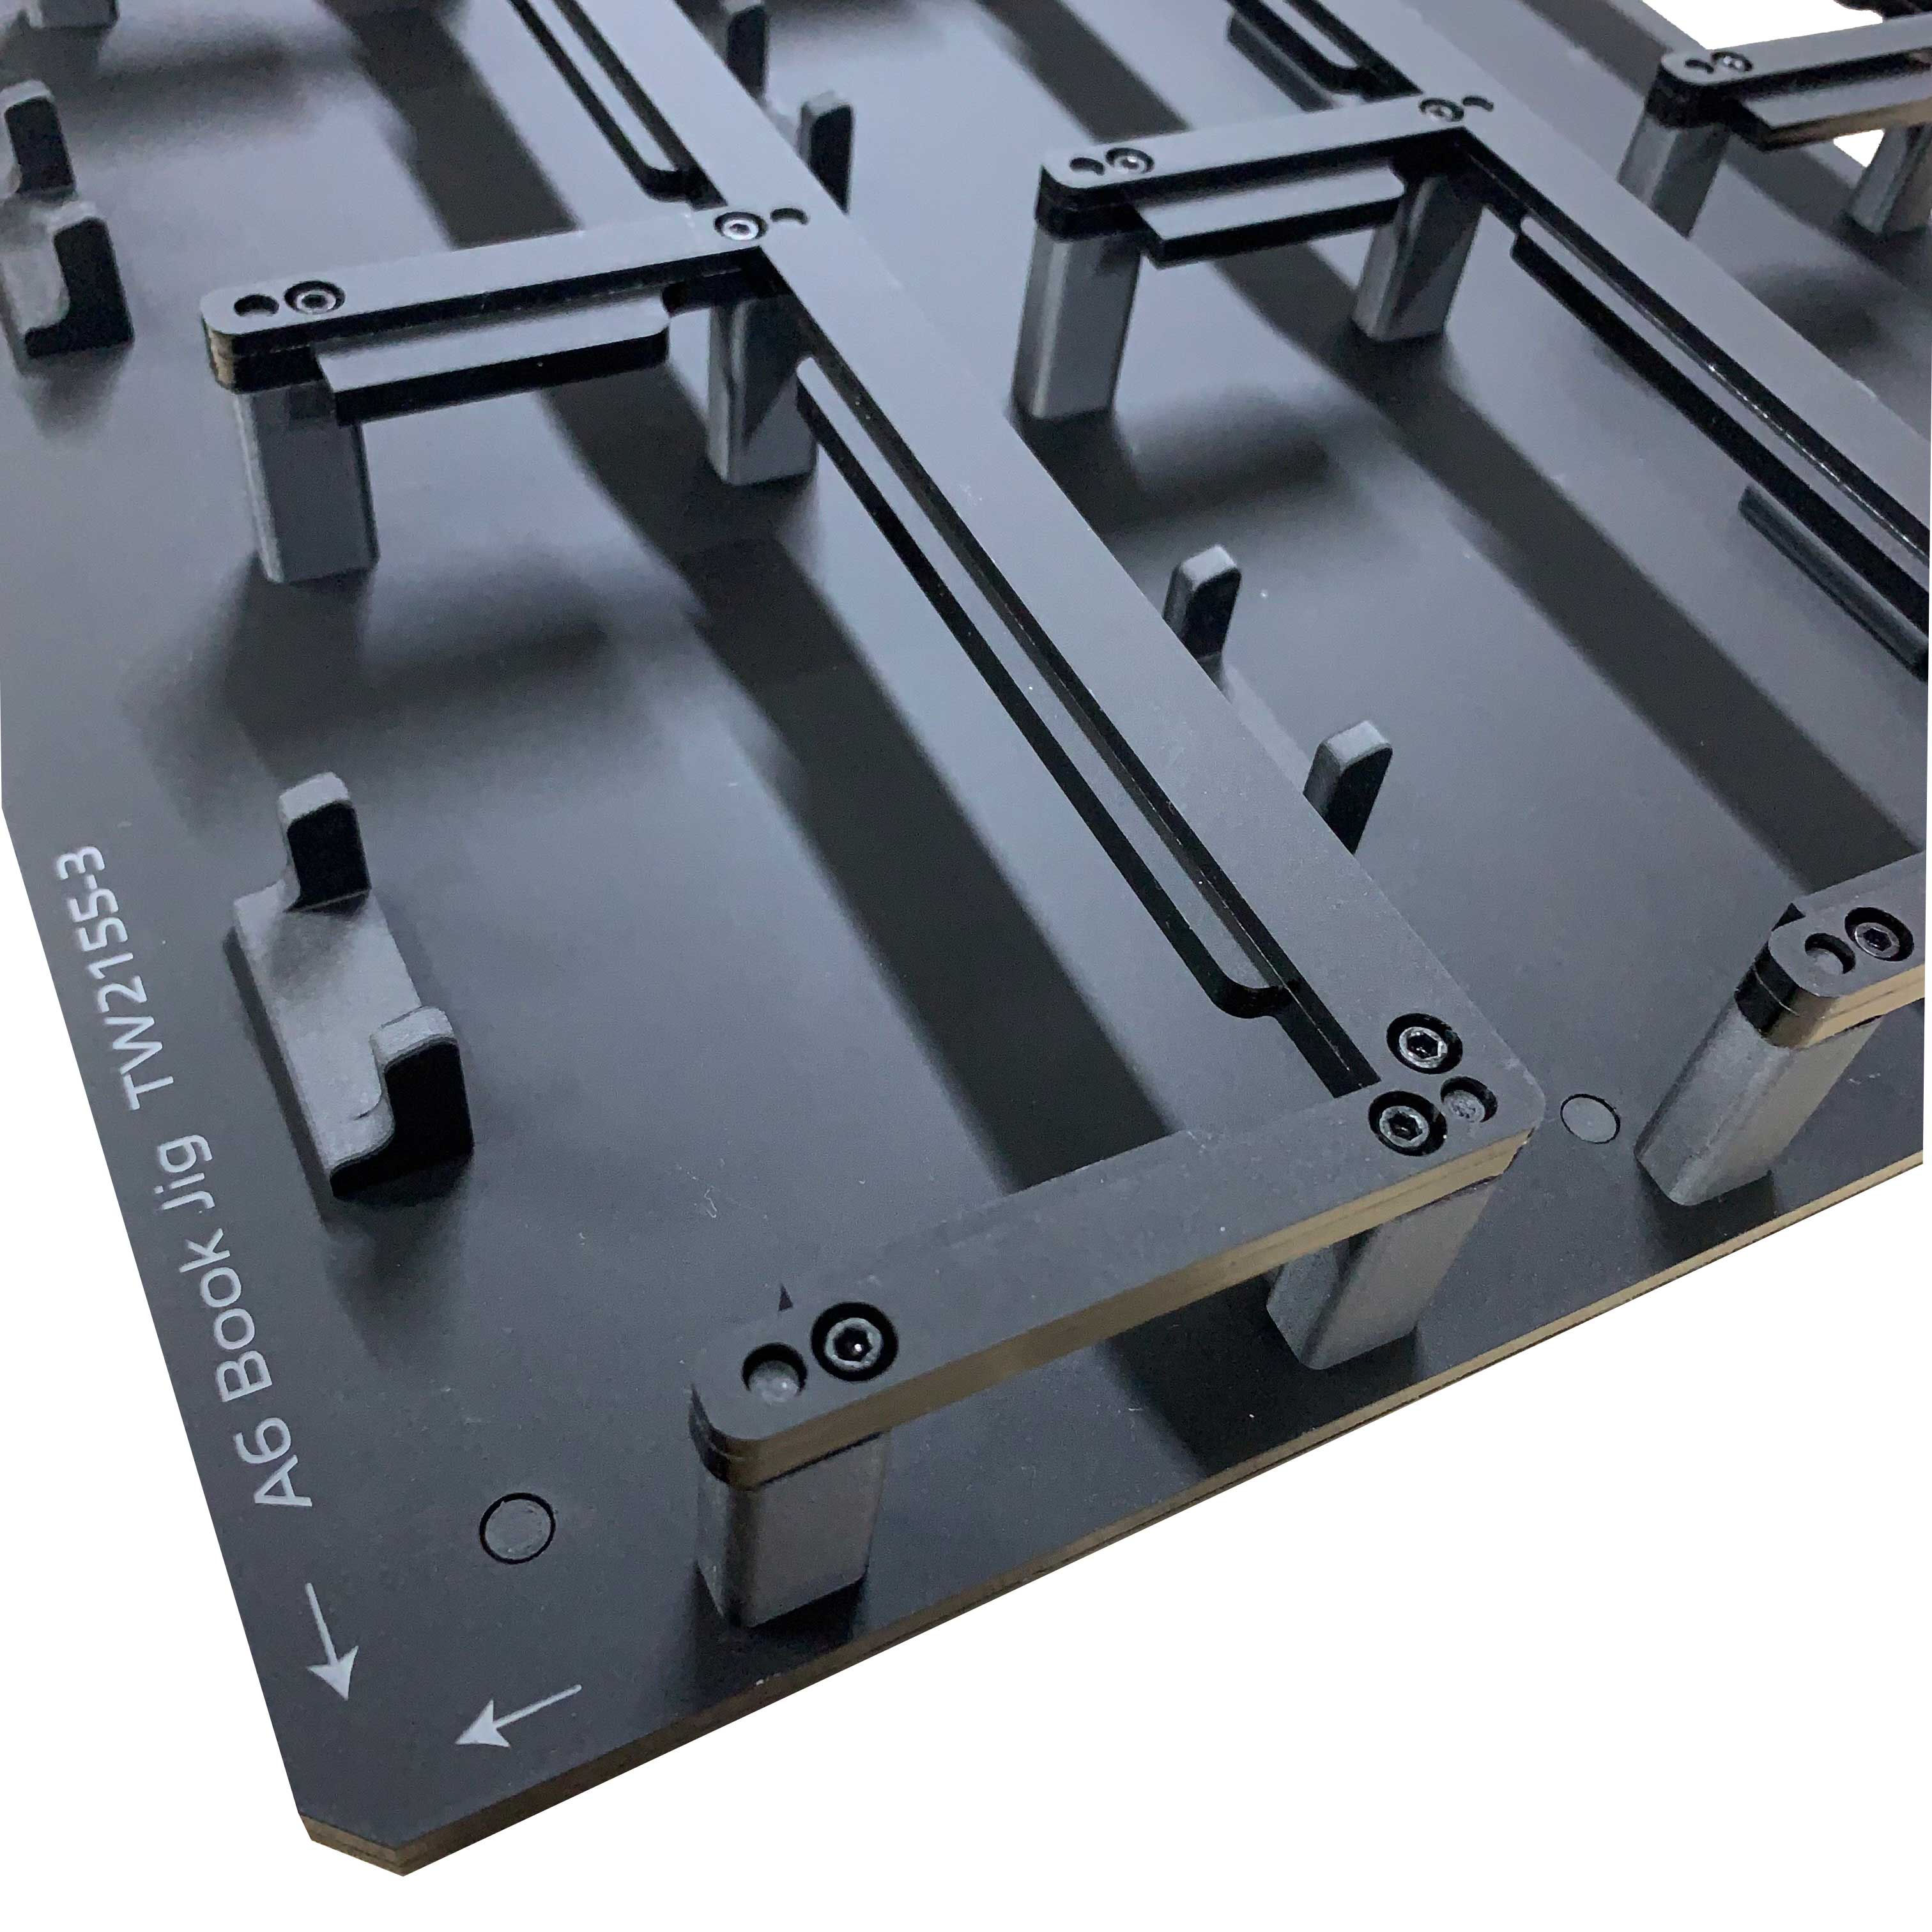 A6 Notebook Printing Jig for Roland MO-240 Flatbed Printer (TBA Spaces)